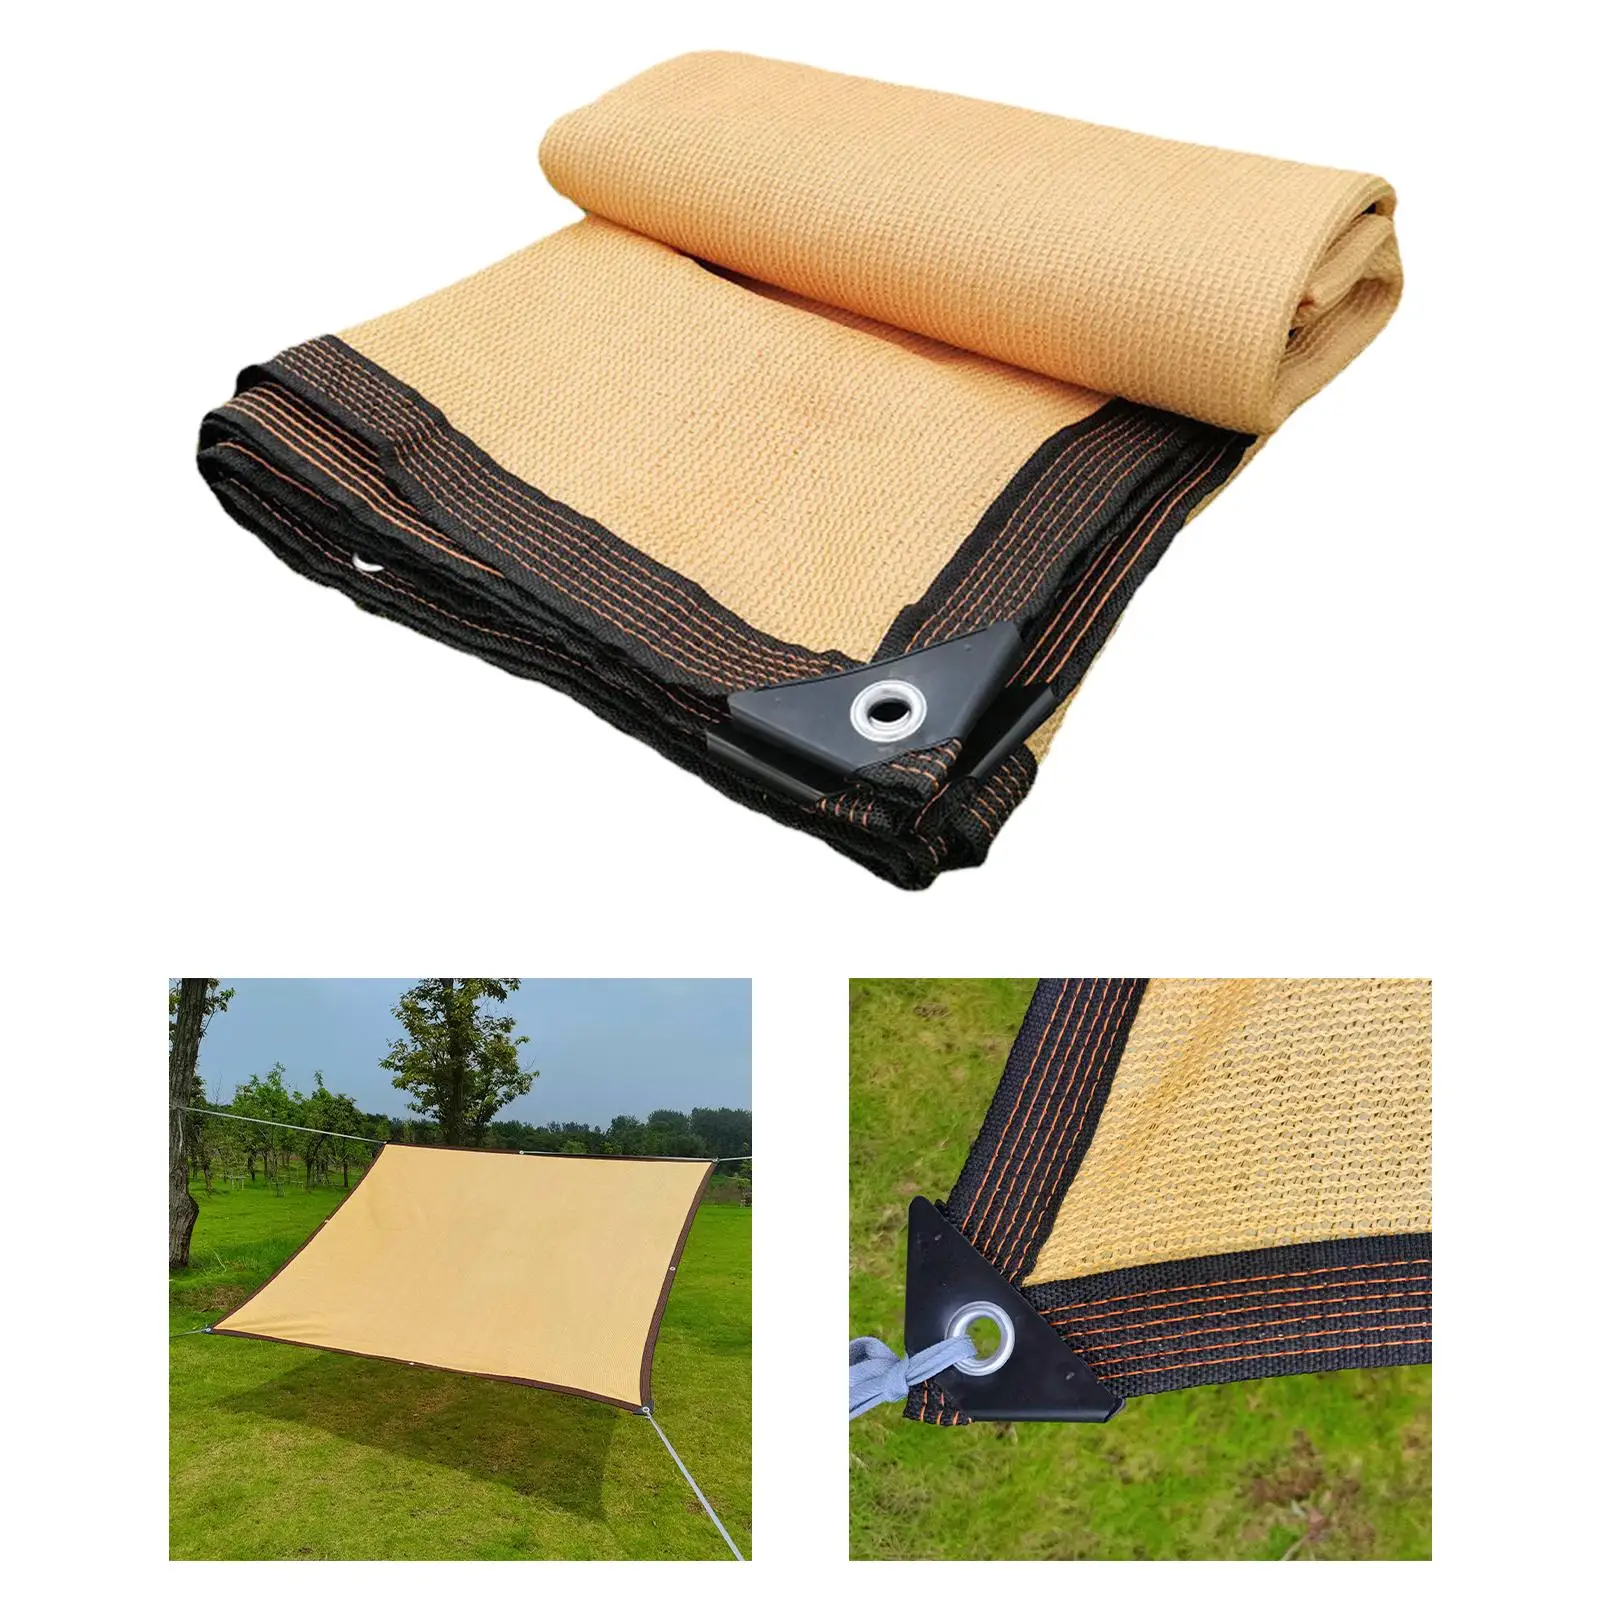 Sun Canopy Shelter Cover Breathable Water Resistant Dustproof Outdoor Suncreen Awning Shadecloth for Parking Shed